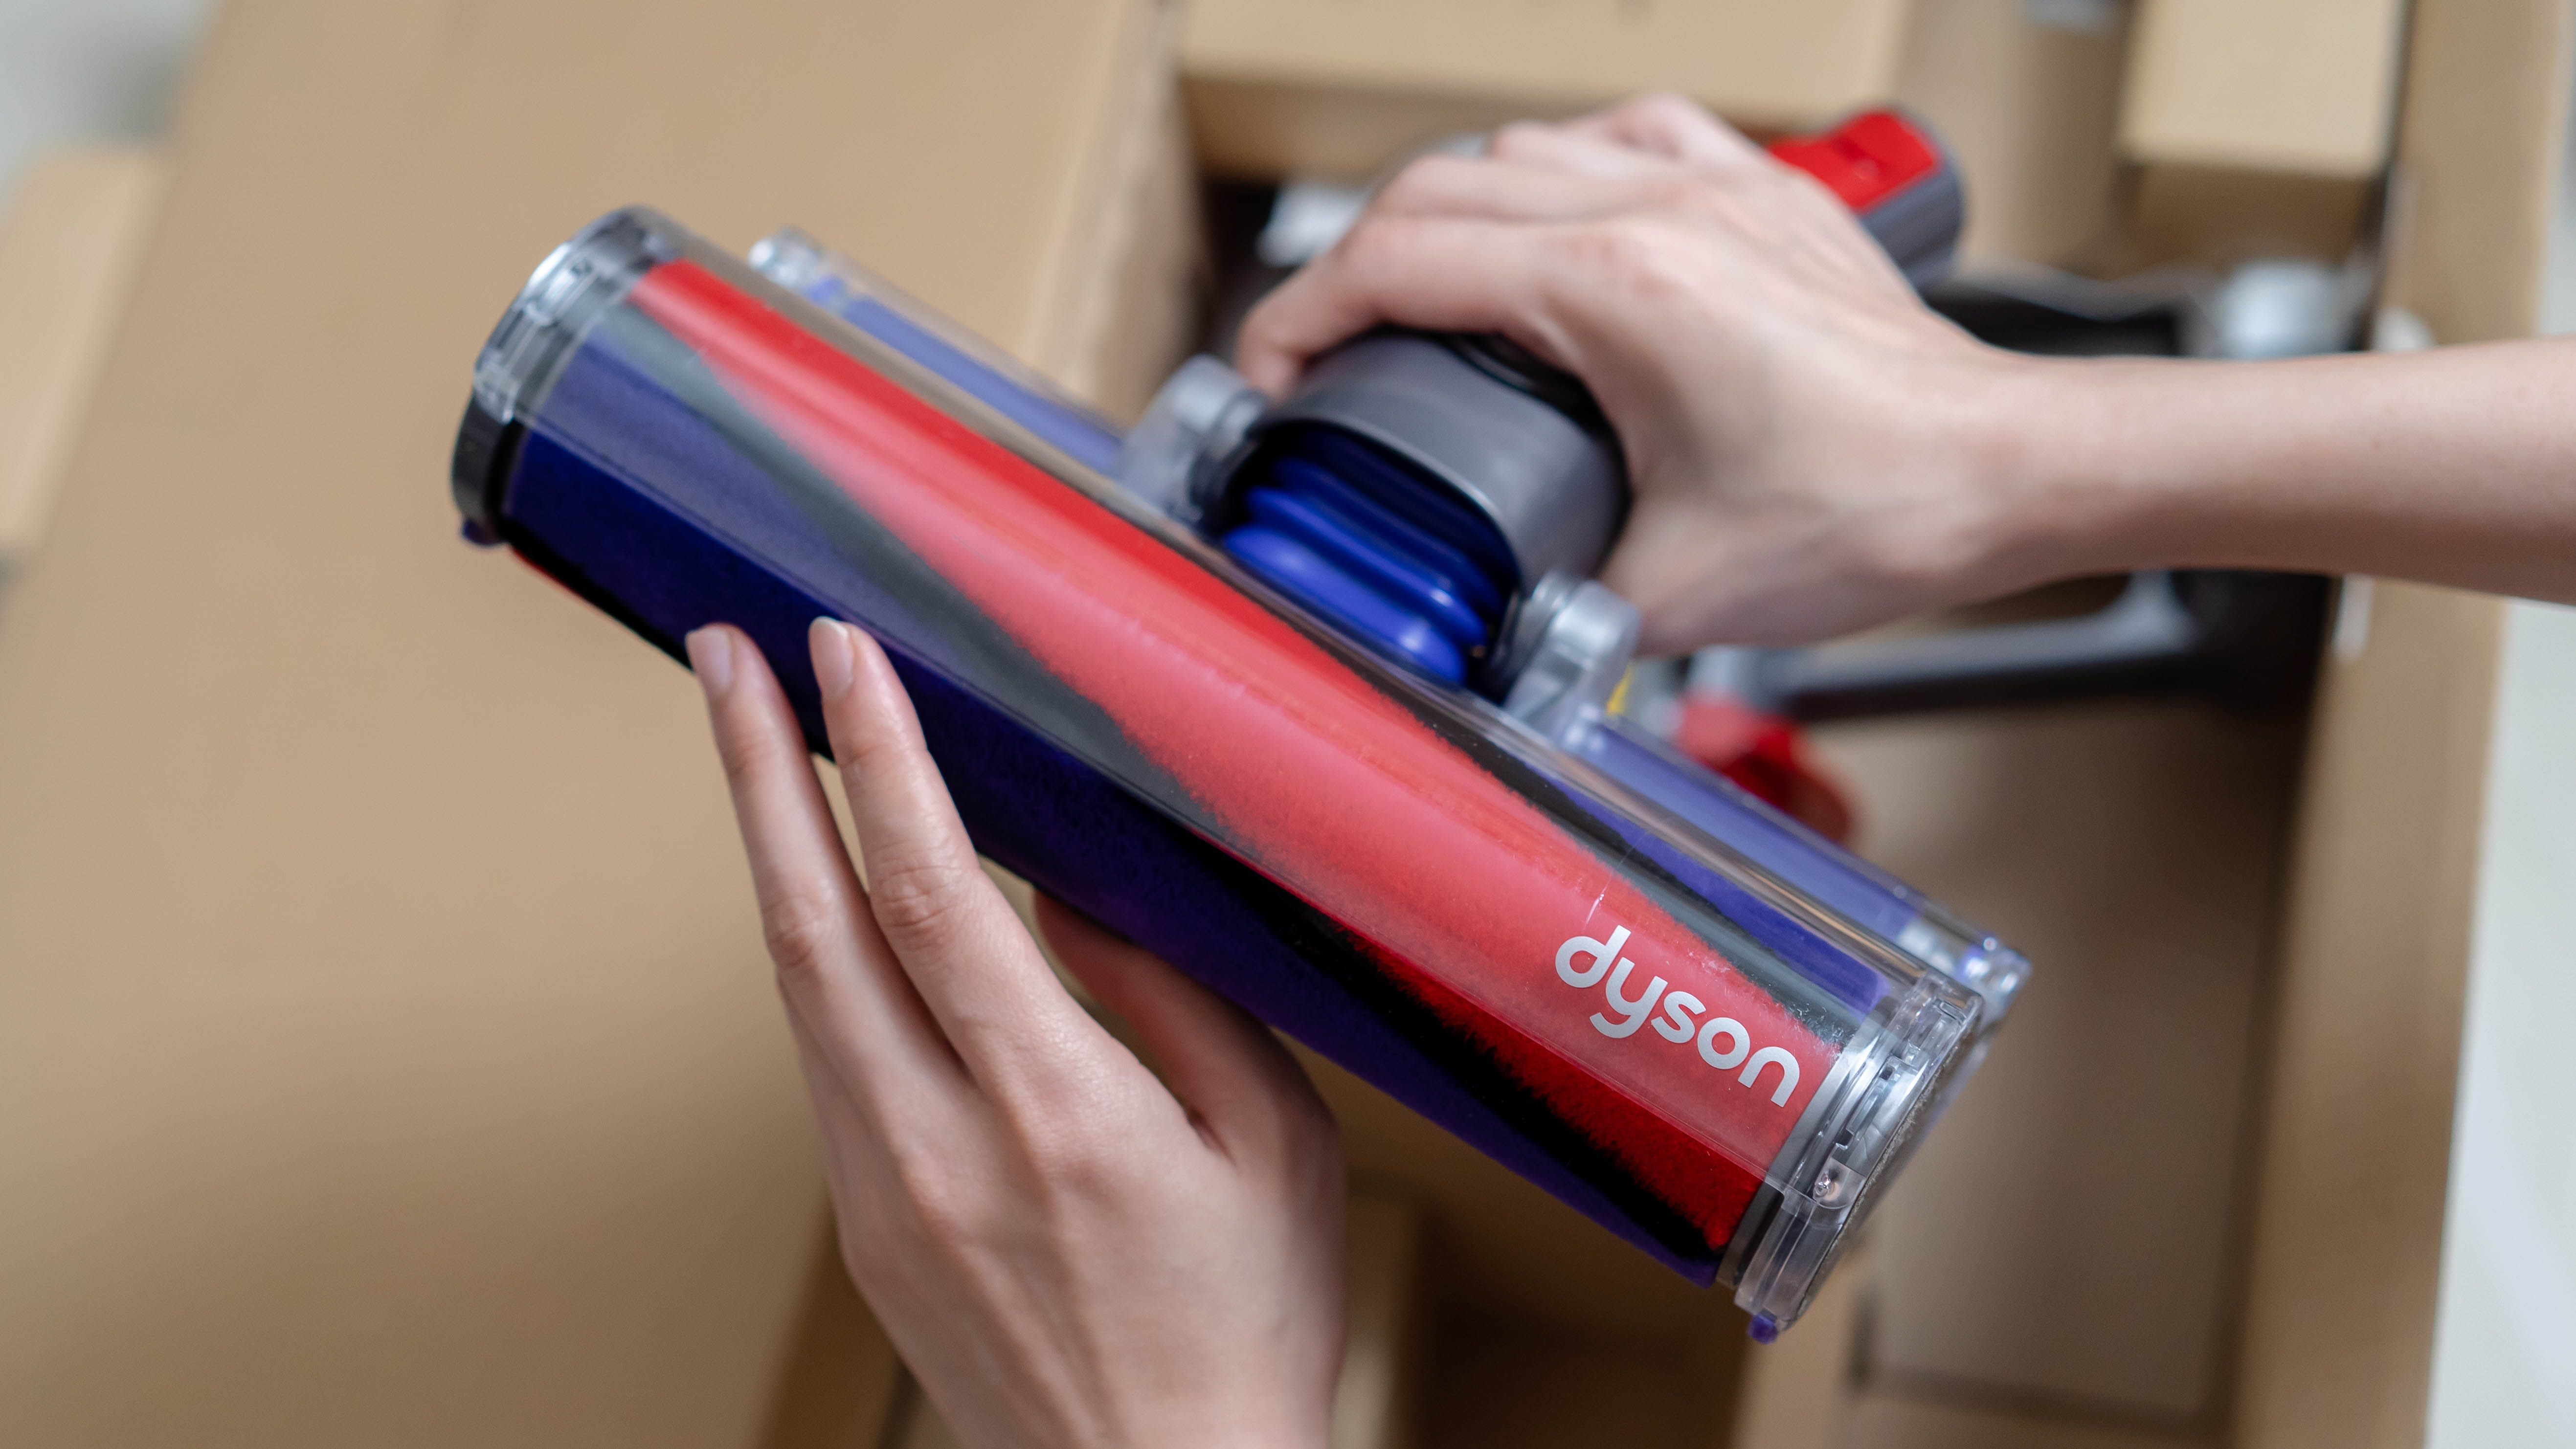 A Dyson vacuum cleaner being removed from the box